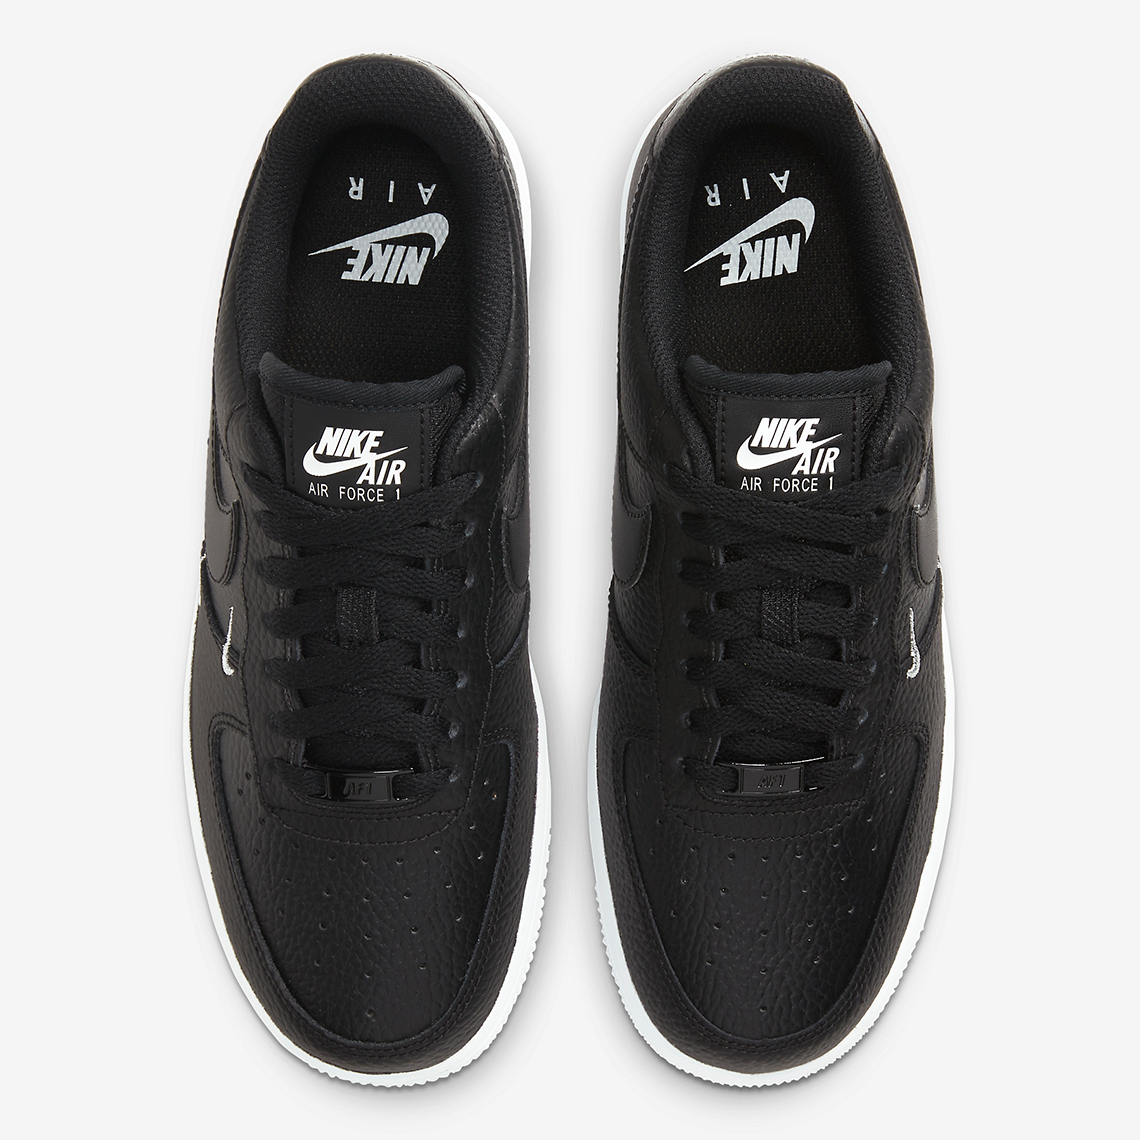 Nike Air Force 1 Low Black Silver Ct1989 002 5